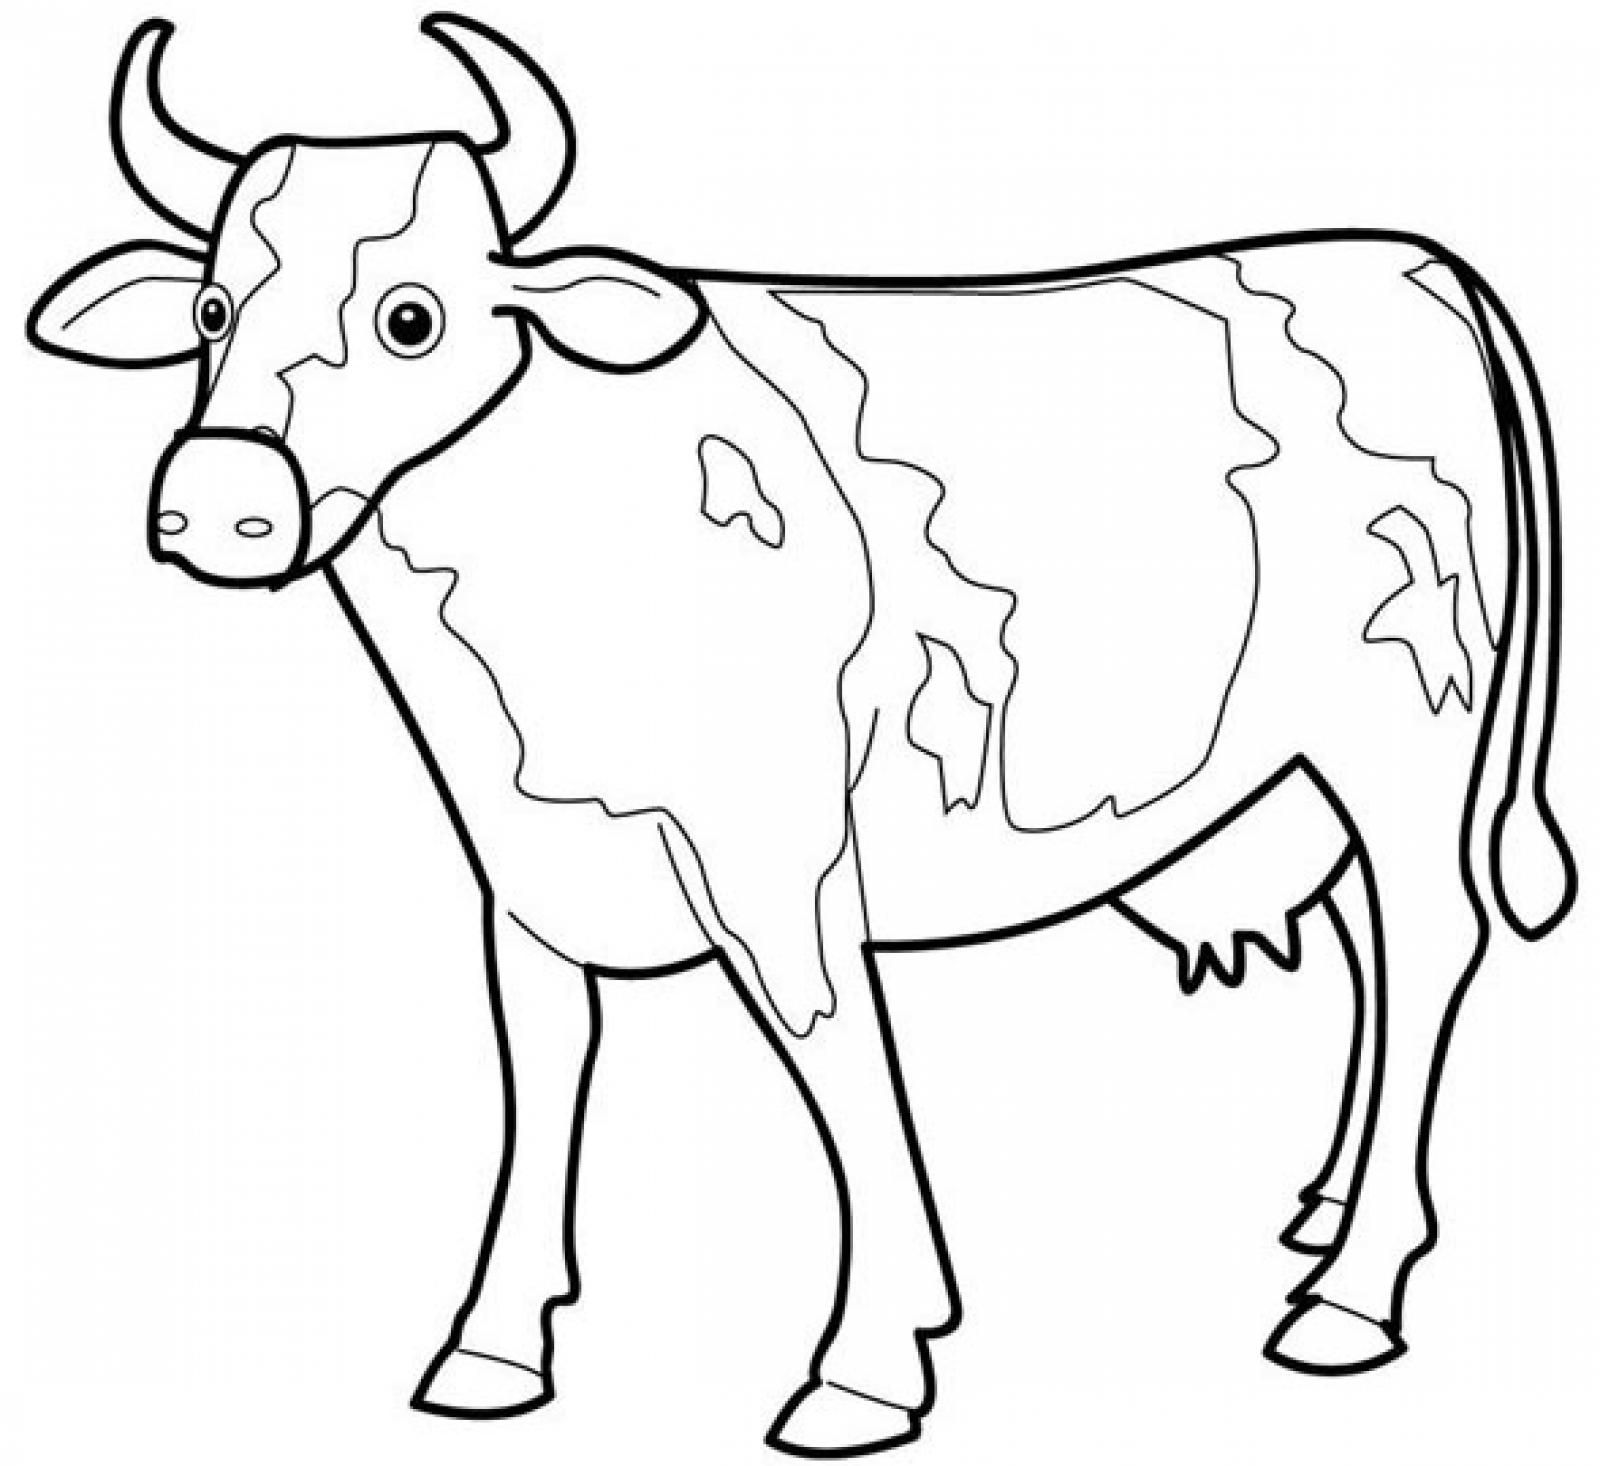 cow-coloring-page-0082-q1